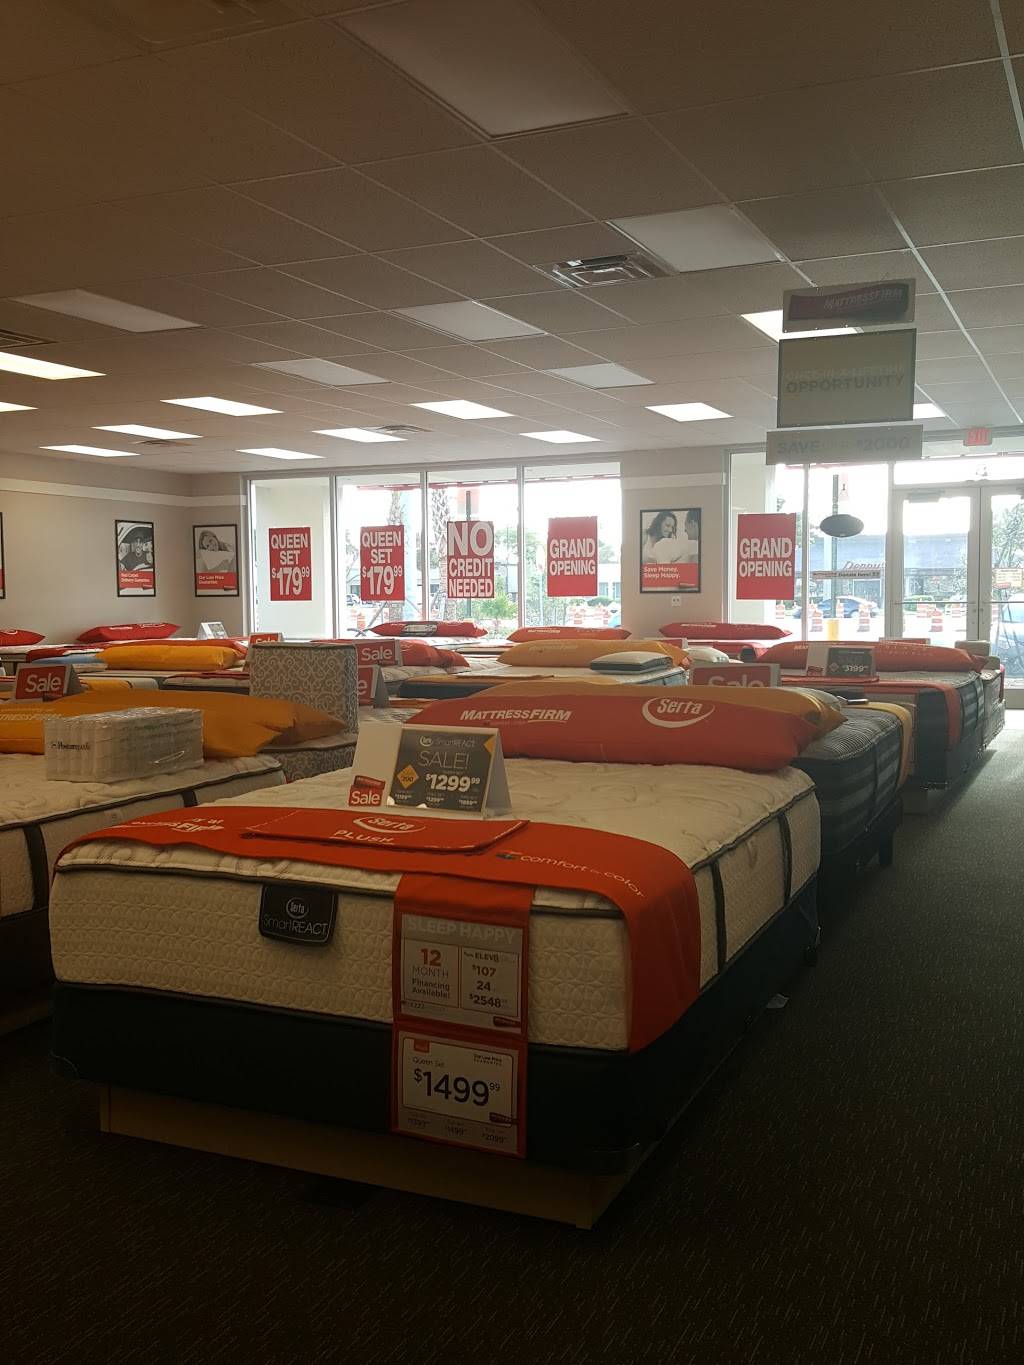 Mattress Firm Place at Hollywood | 211 S State Rd 7 Unit B, Hollywood, FL 33023 | Phone: (954) 790-5173